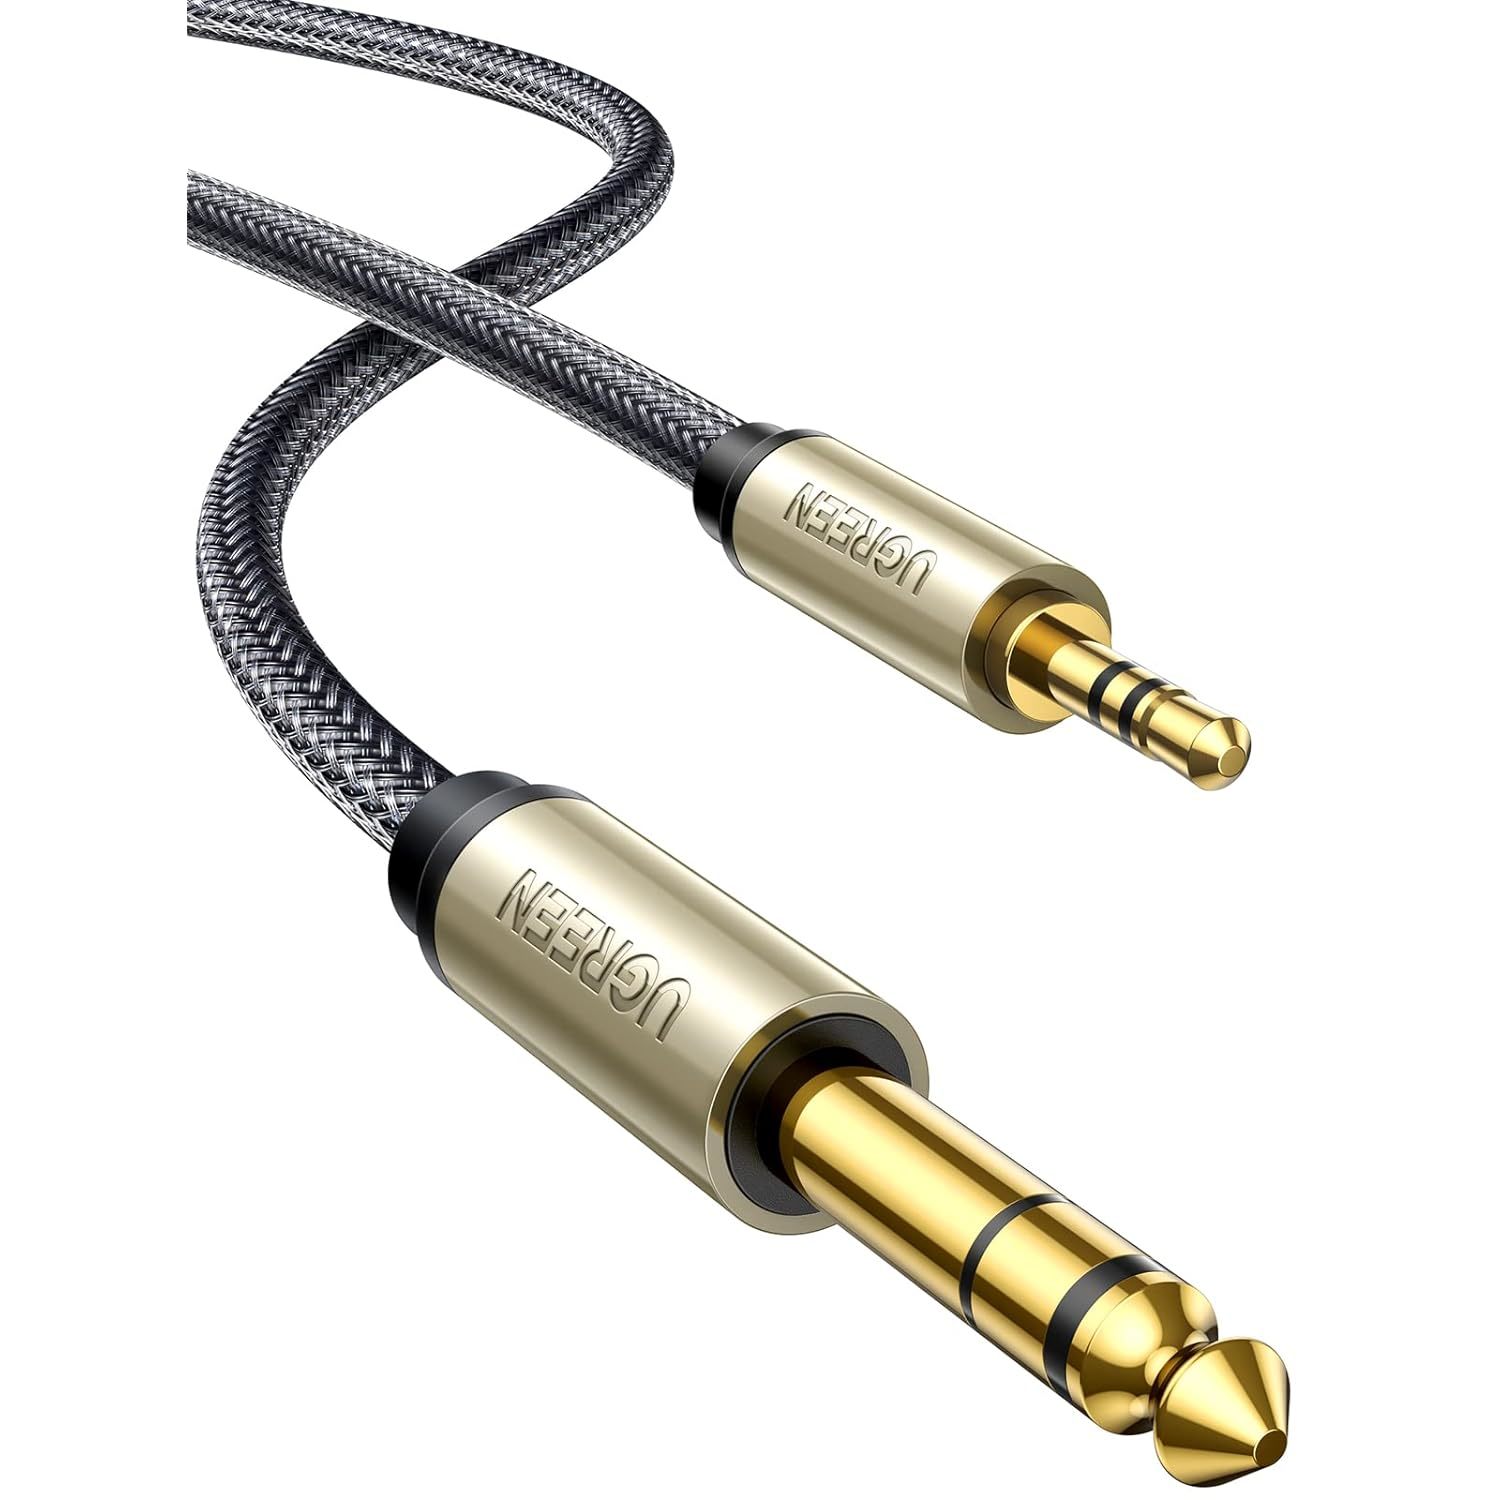 UGREEN 6.35mm 1/4 Male to 3.5mm 1/8 Male TRS Stereo Audio Cable with Zinc Alloy  - $27.99